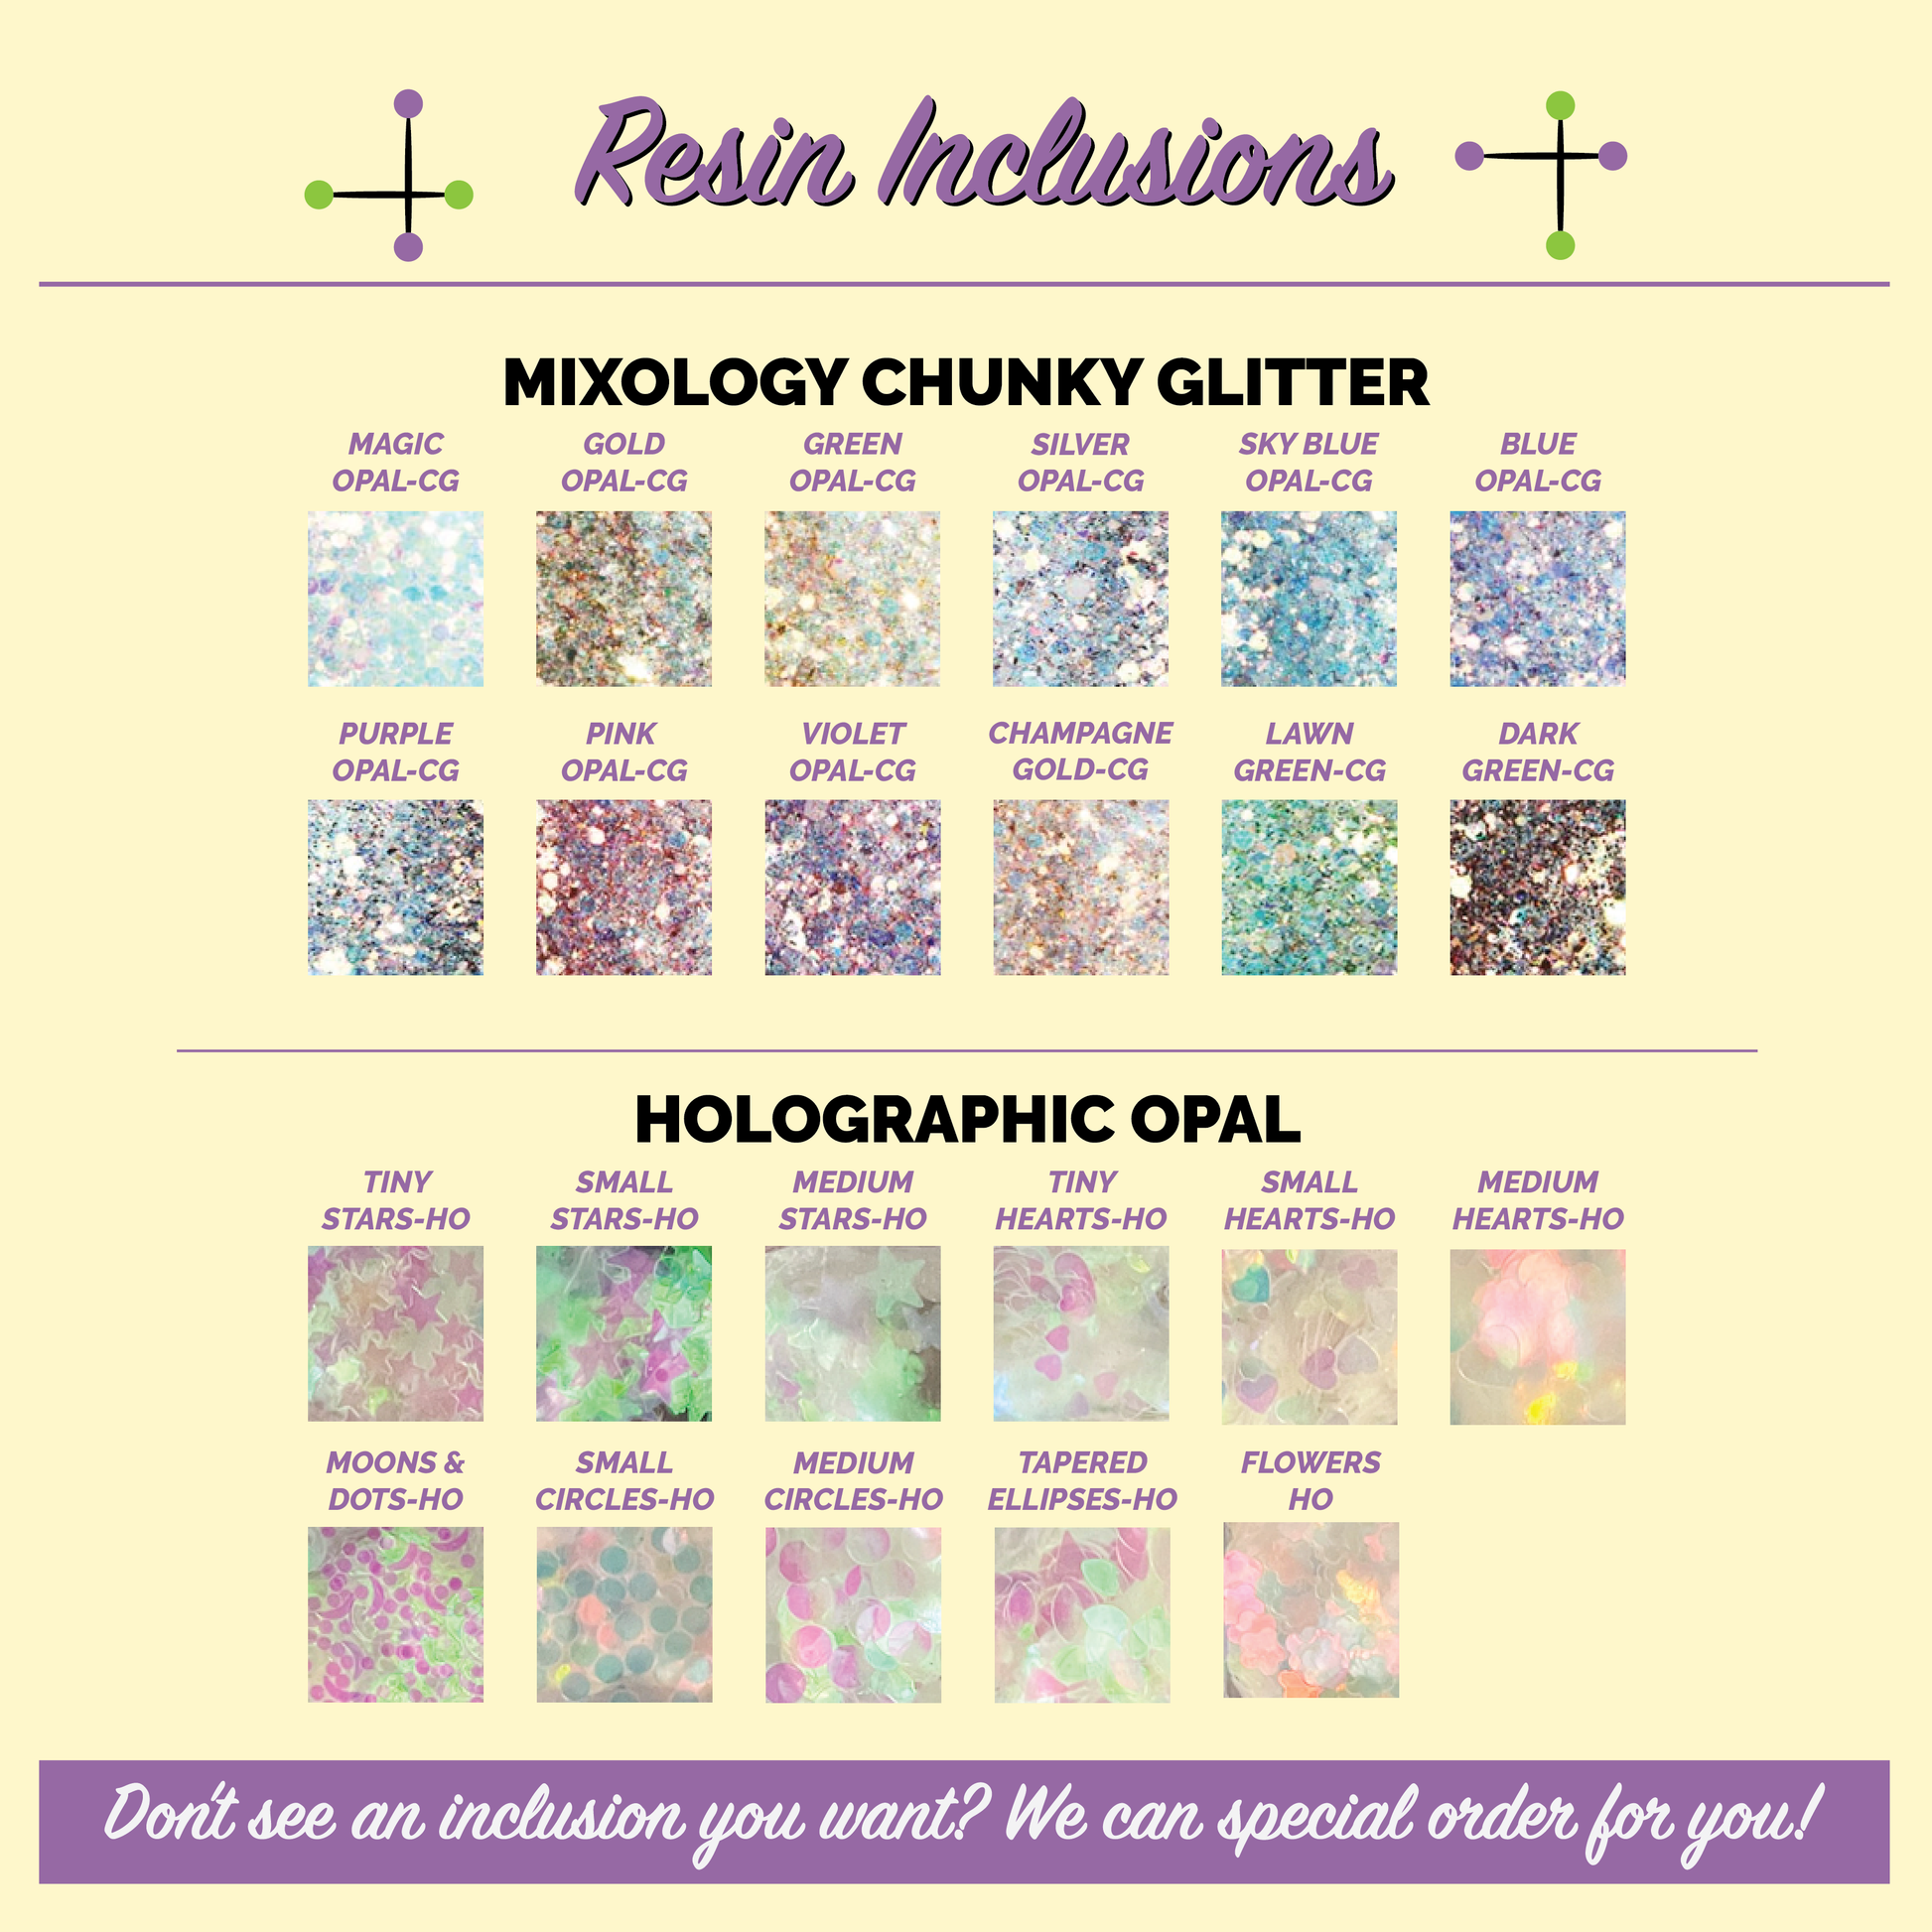 Resin Inclusions - chunky glitter and holographic opal